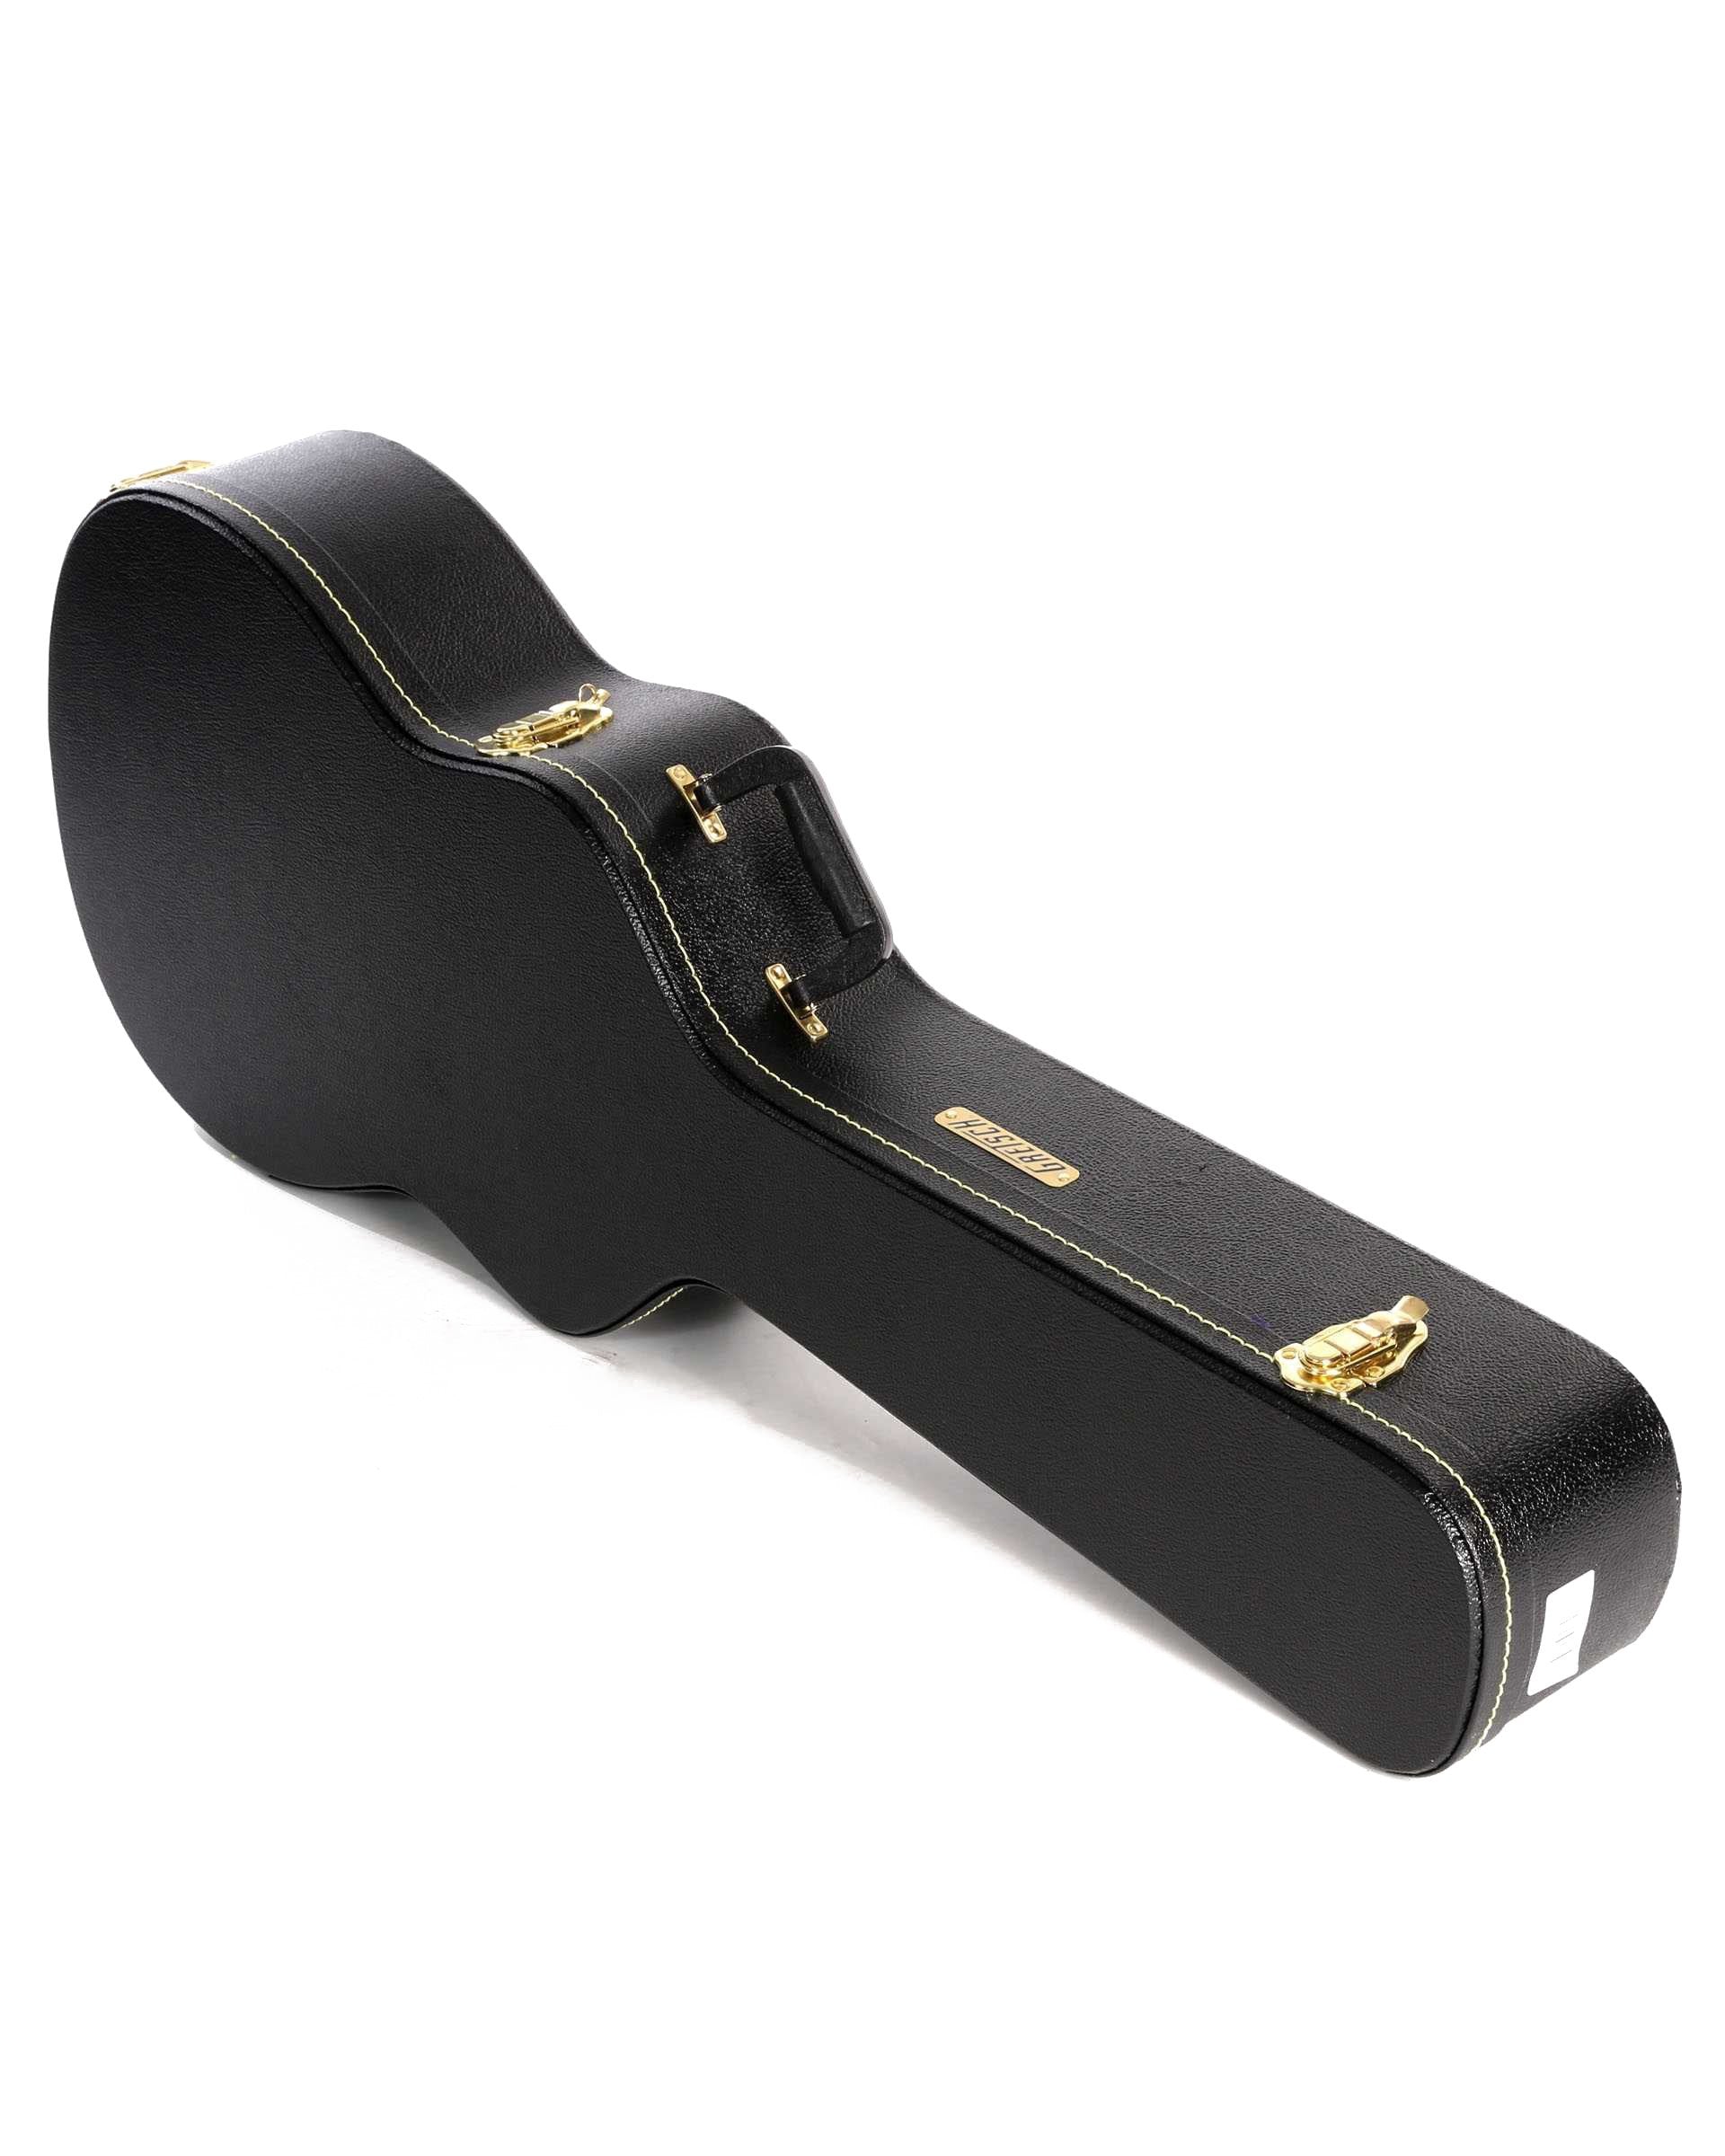 Image 1 of Gretsch G6295 Case for Square Neck Resonator Models - SKU# GCGR-G6295 : Product Type Accessories & Parts : Elderly Instruments